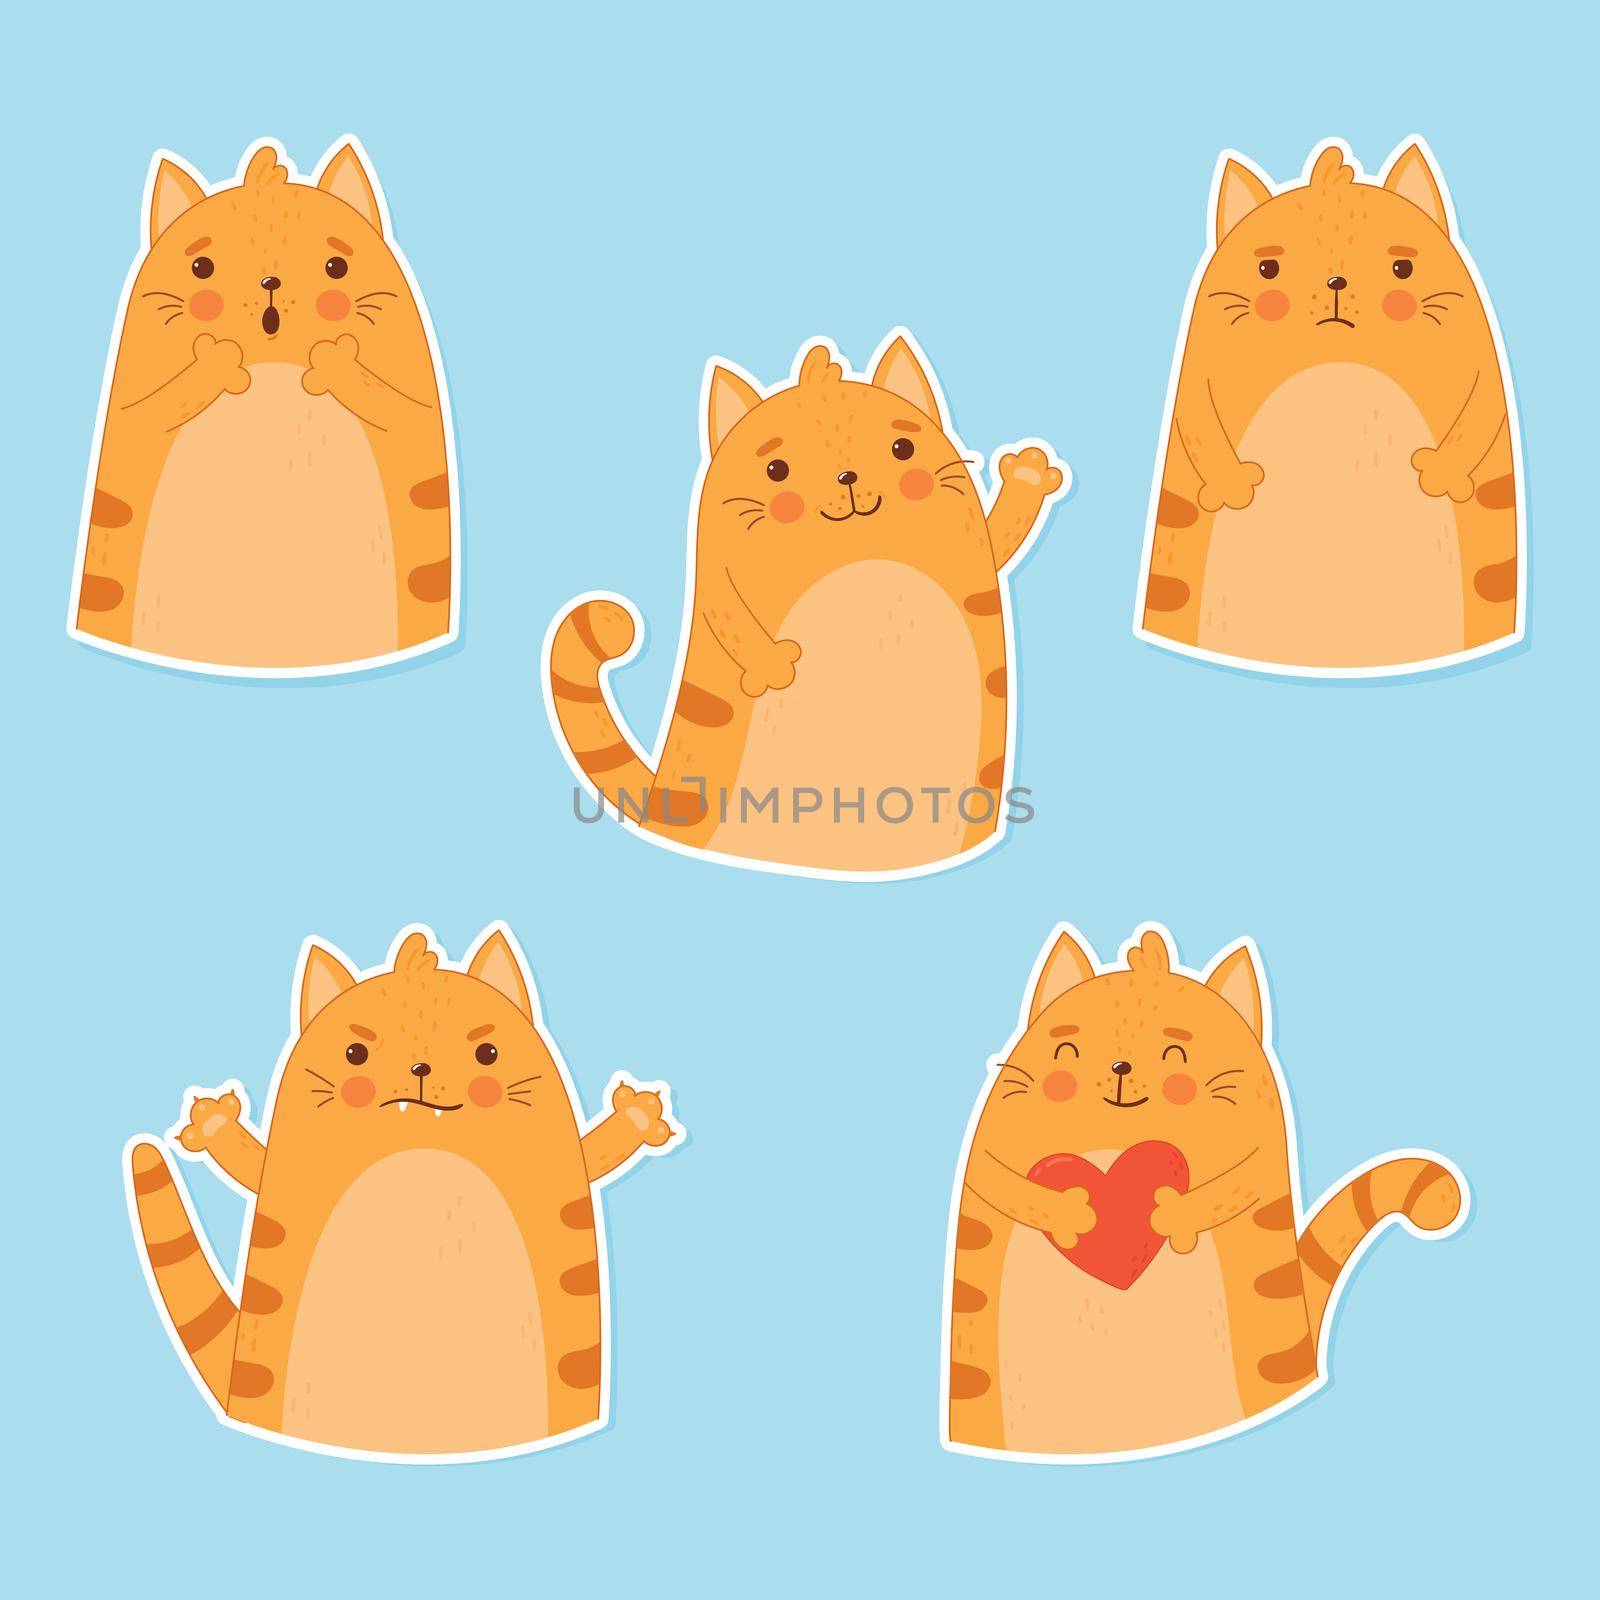 Cat emoticons, sticker collection. Cartoon flat style. Cute ginger cat with different emotions. Vector illustration isolated on a blue background.